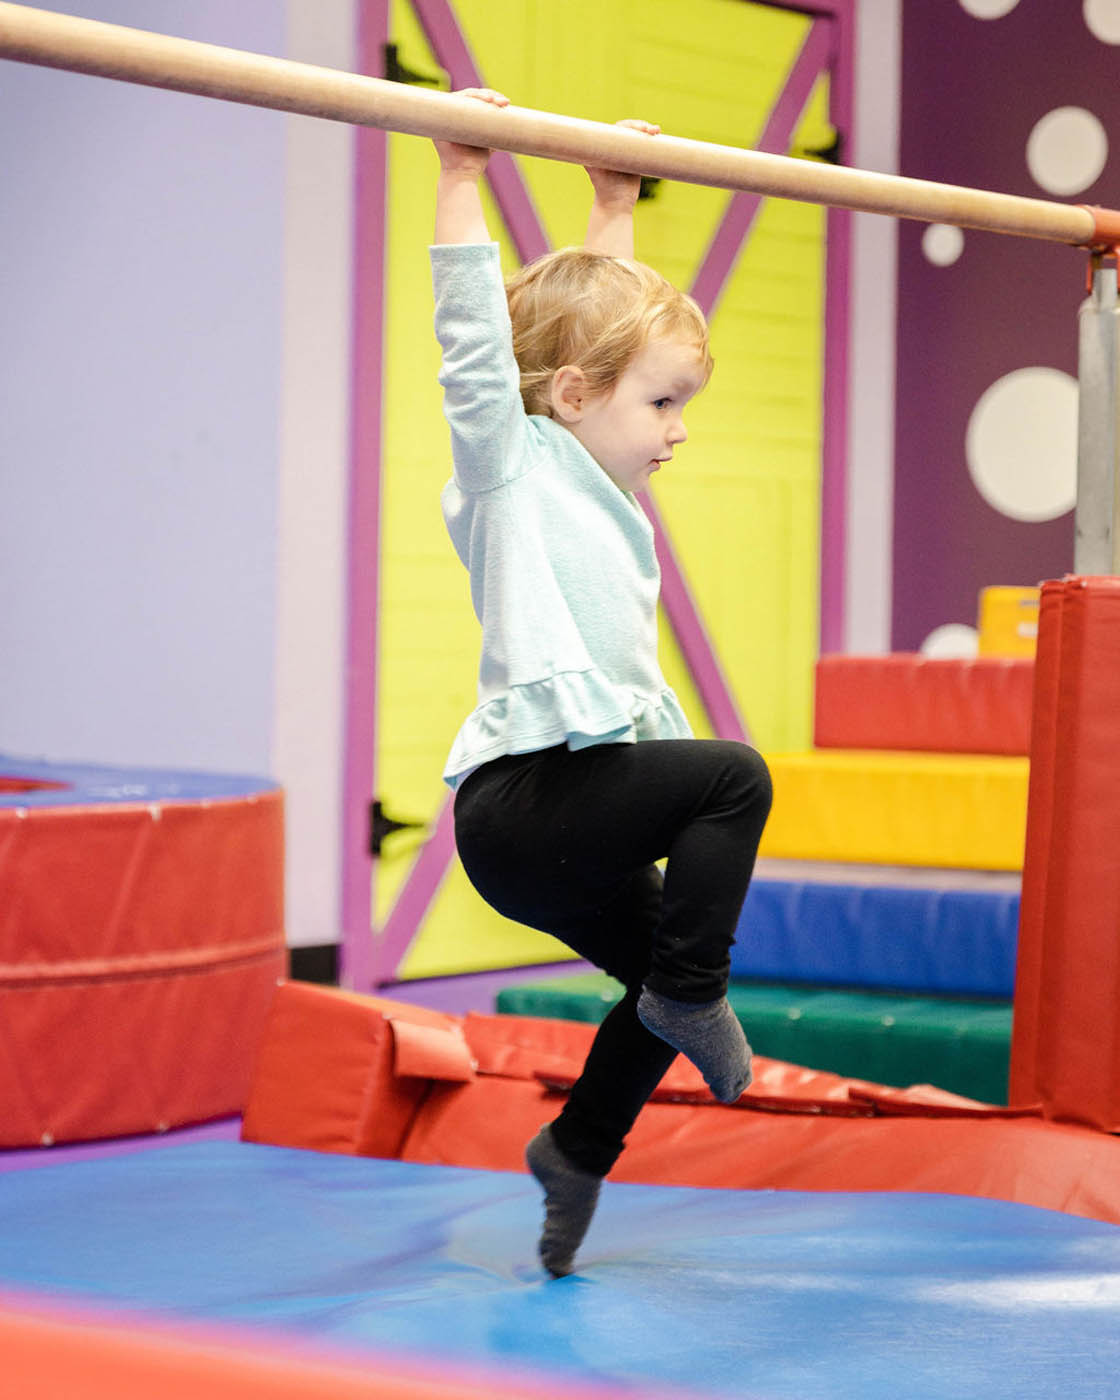 A kid swining from Romp n' Roll gym equipment - safe kids fitness classes.